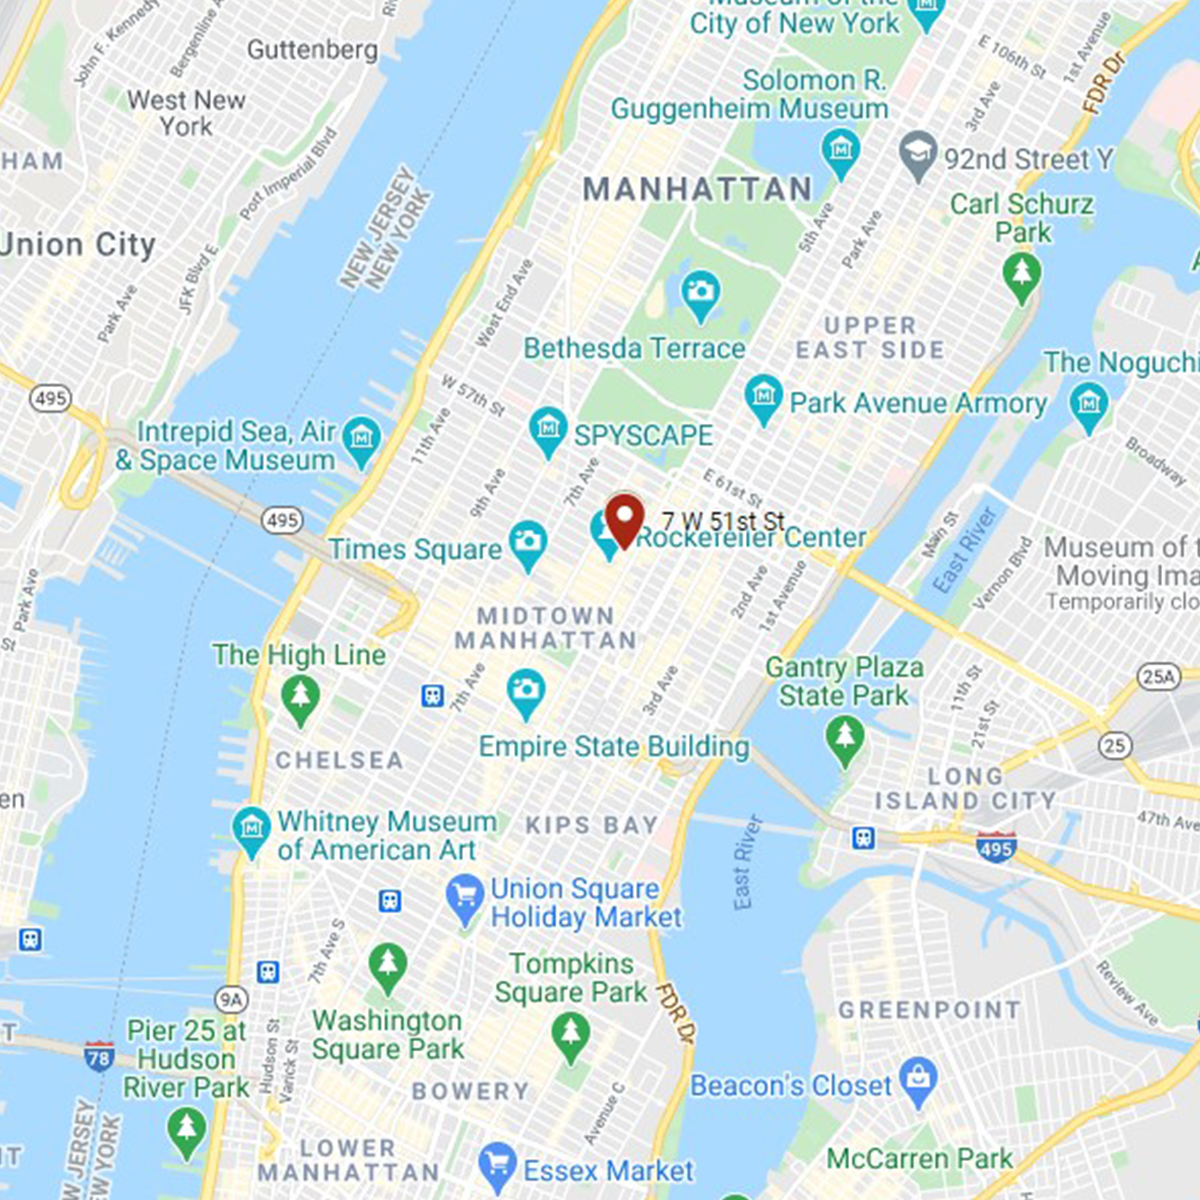 NYC location on a map square